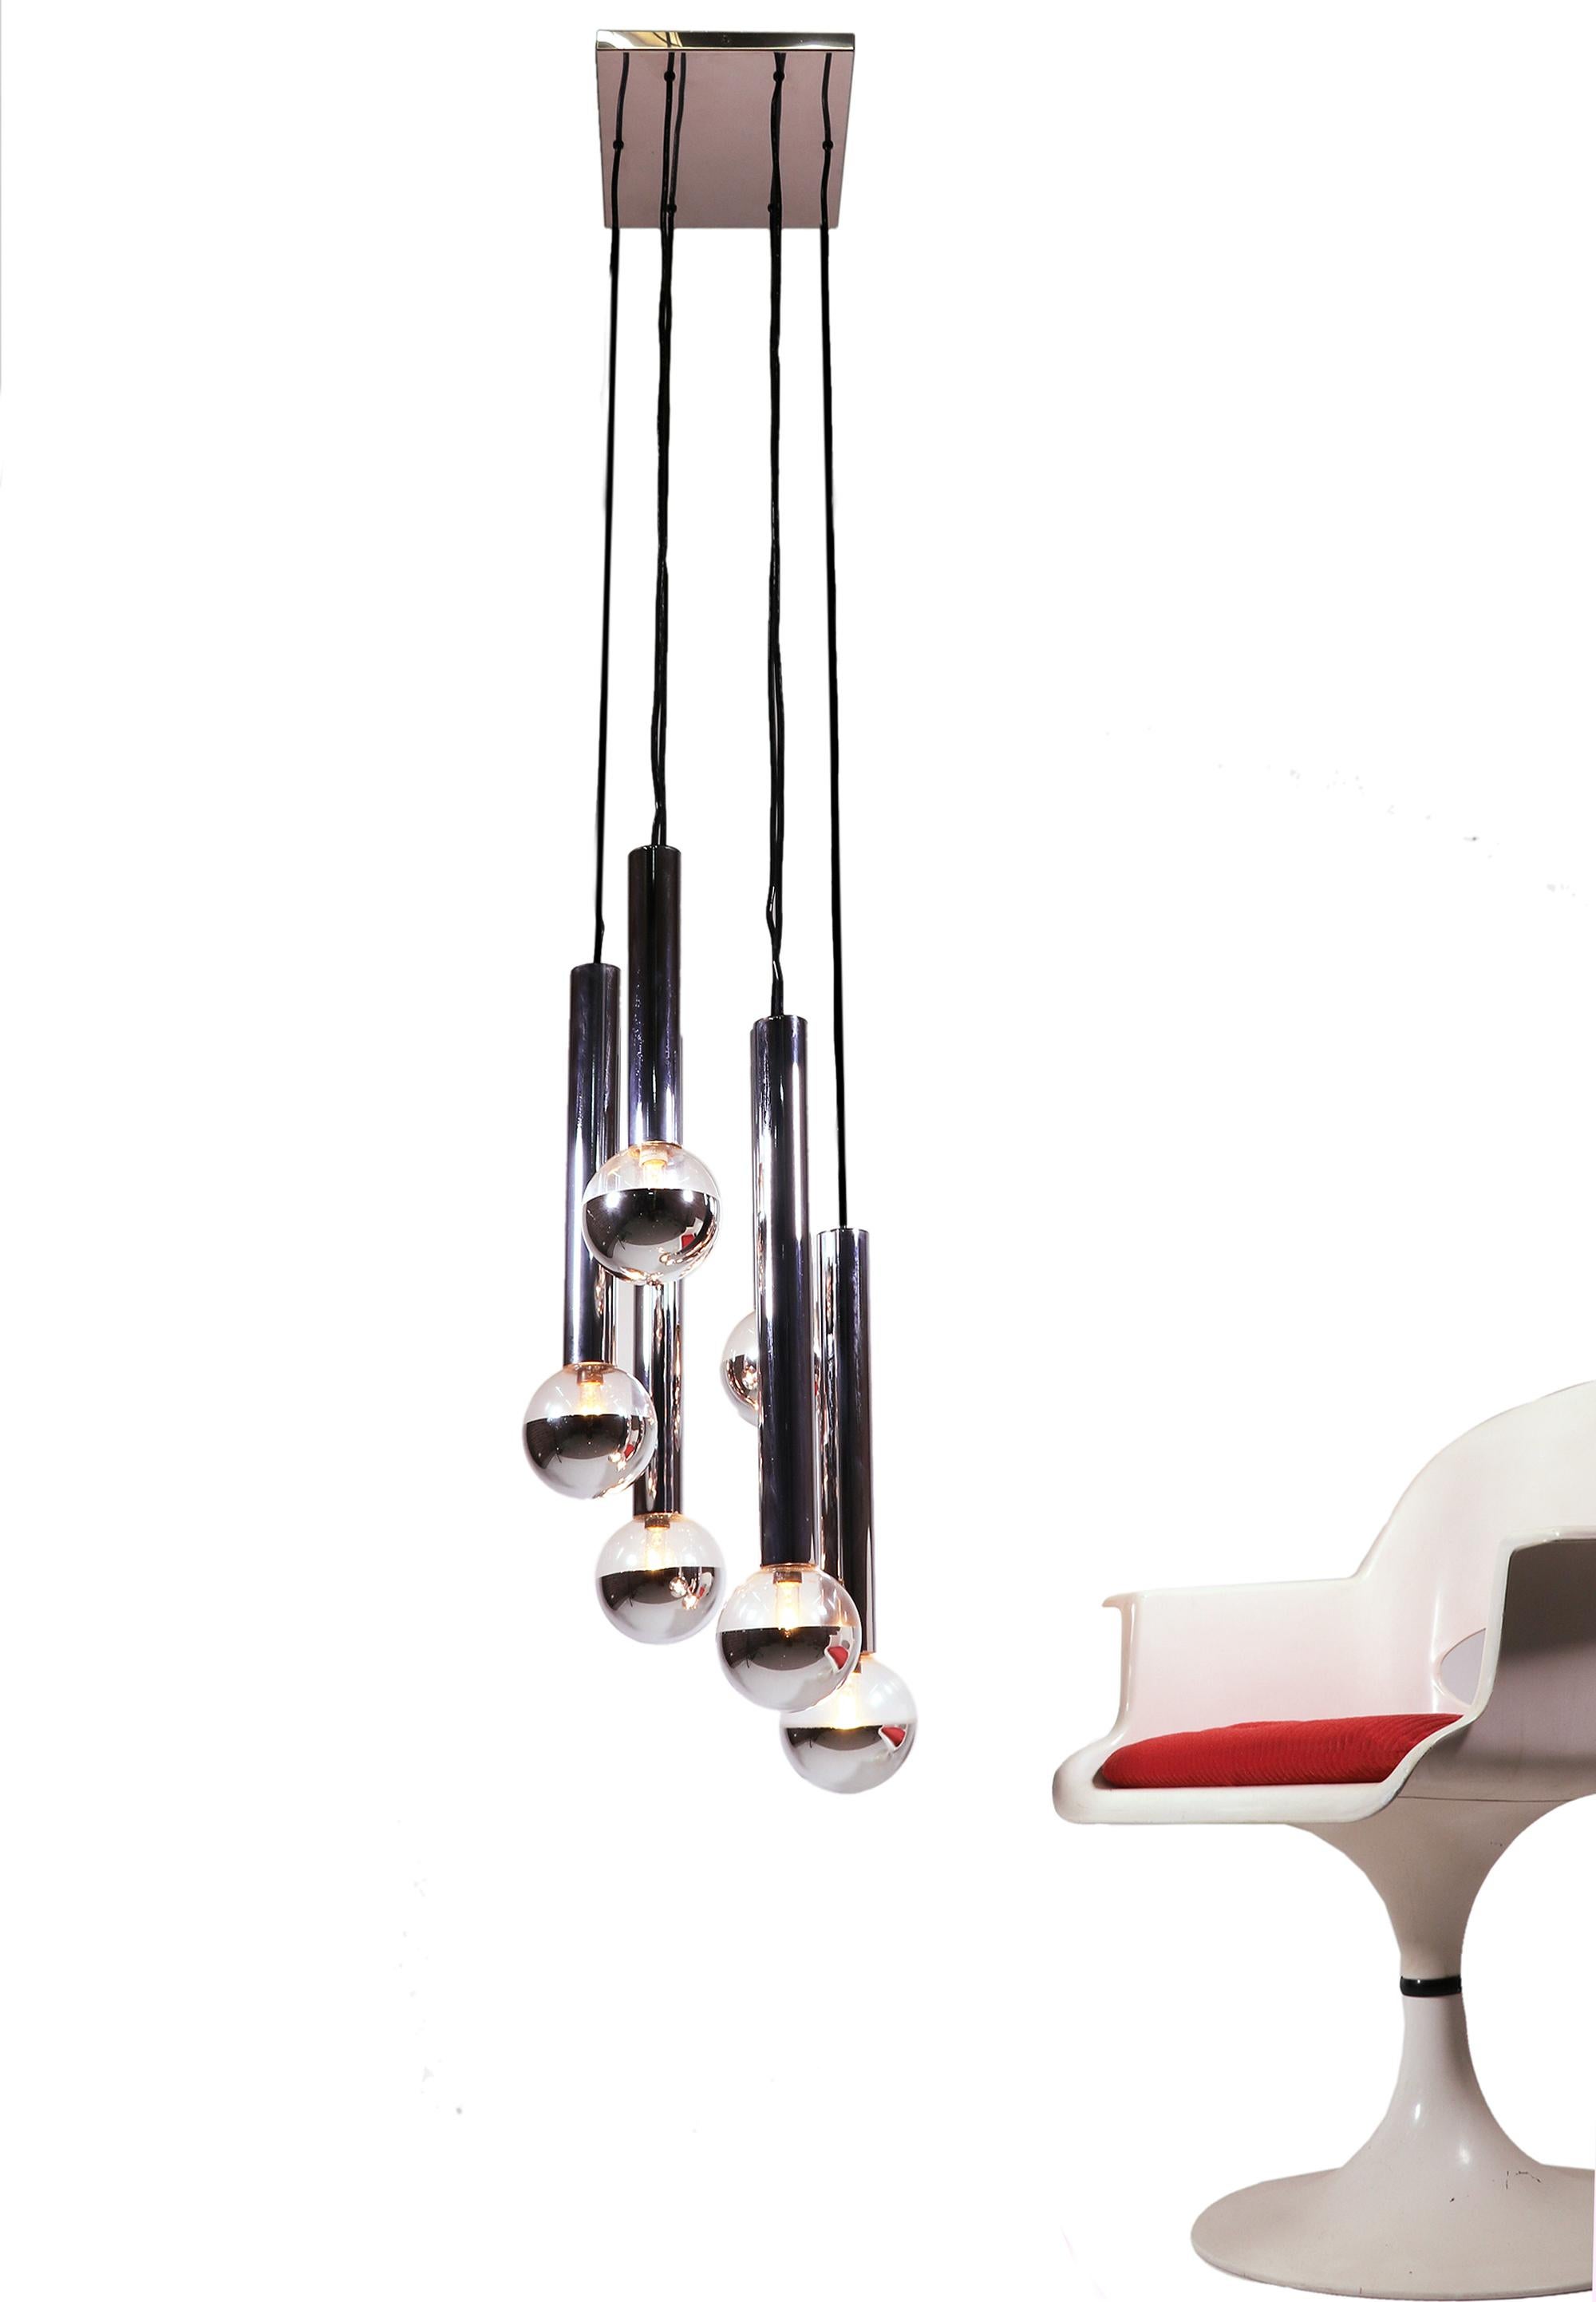 Elegant space age sputnik ceiling light with six partially mirrored glass shades on chromed metal tubes and frame designed by Motoko Ishii. All lampshades are made of wafer-thin glass, which is optically similar to light bulbs. 

The height of the